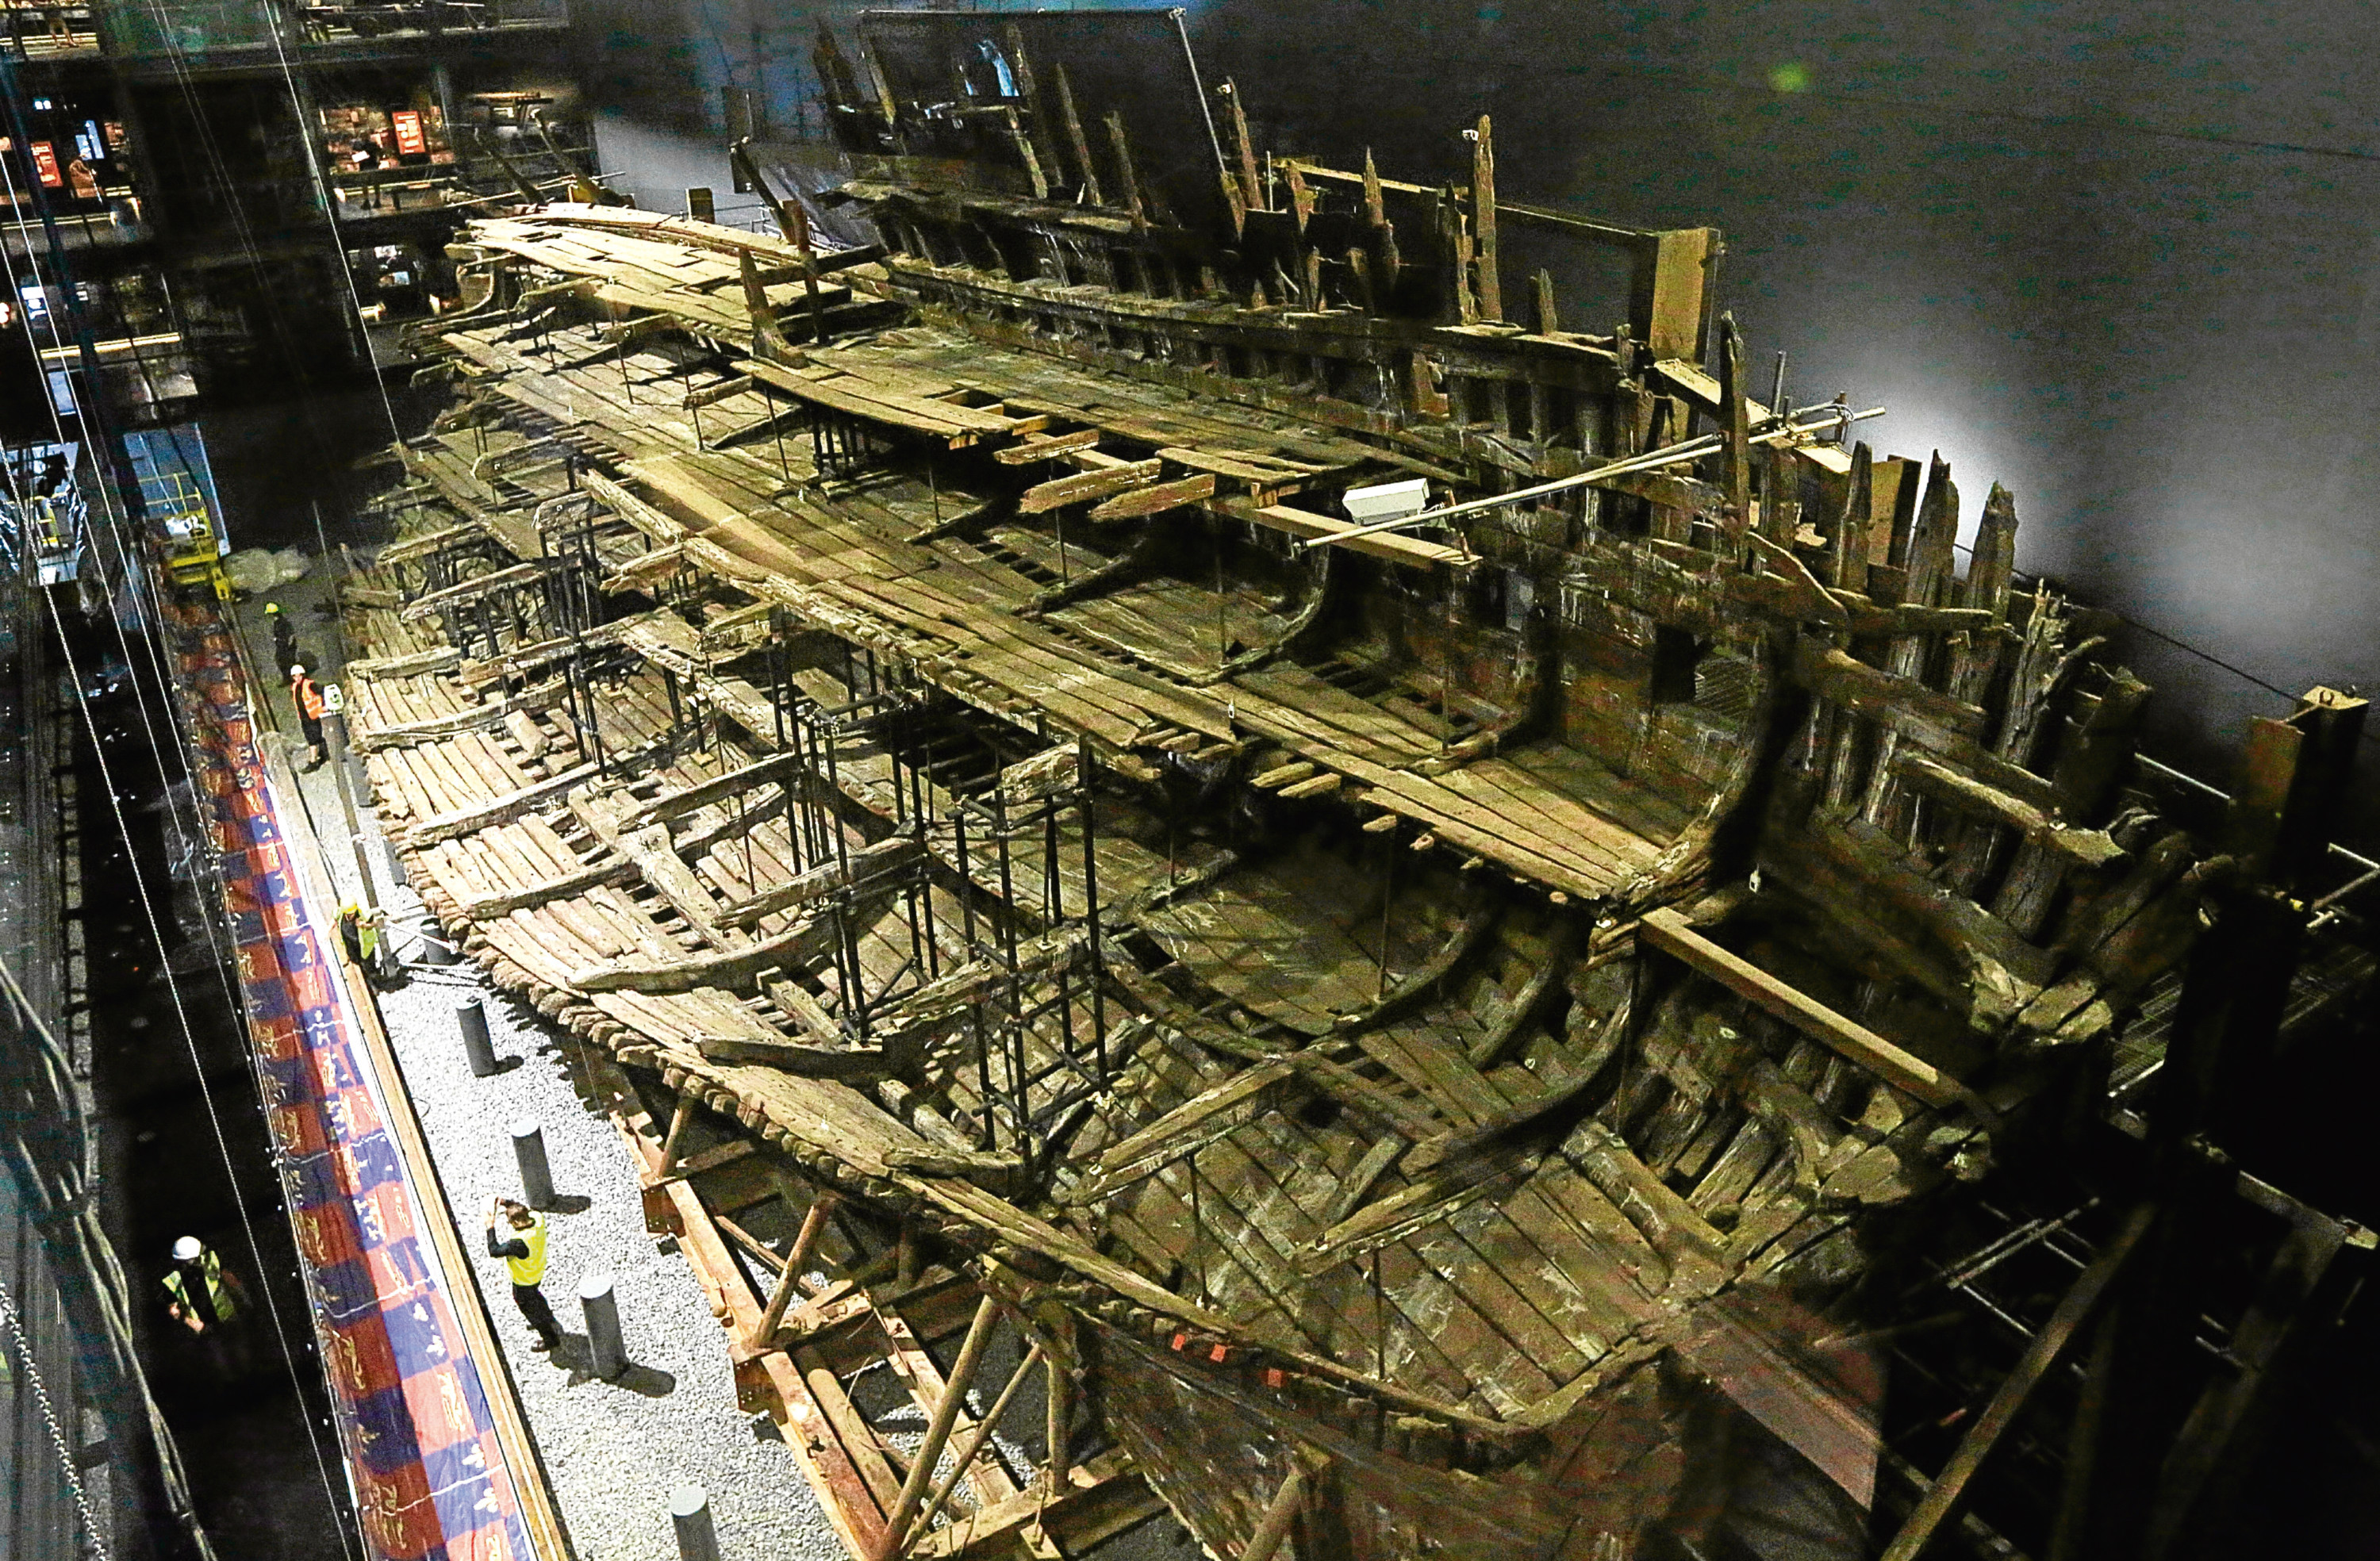 Henry VIII's warship, the Mary Rose after a £5.4m museum revamp  (Olivia Harris/Getty Images)